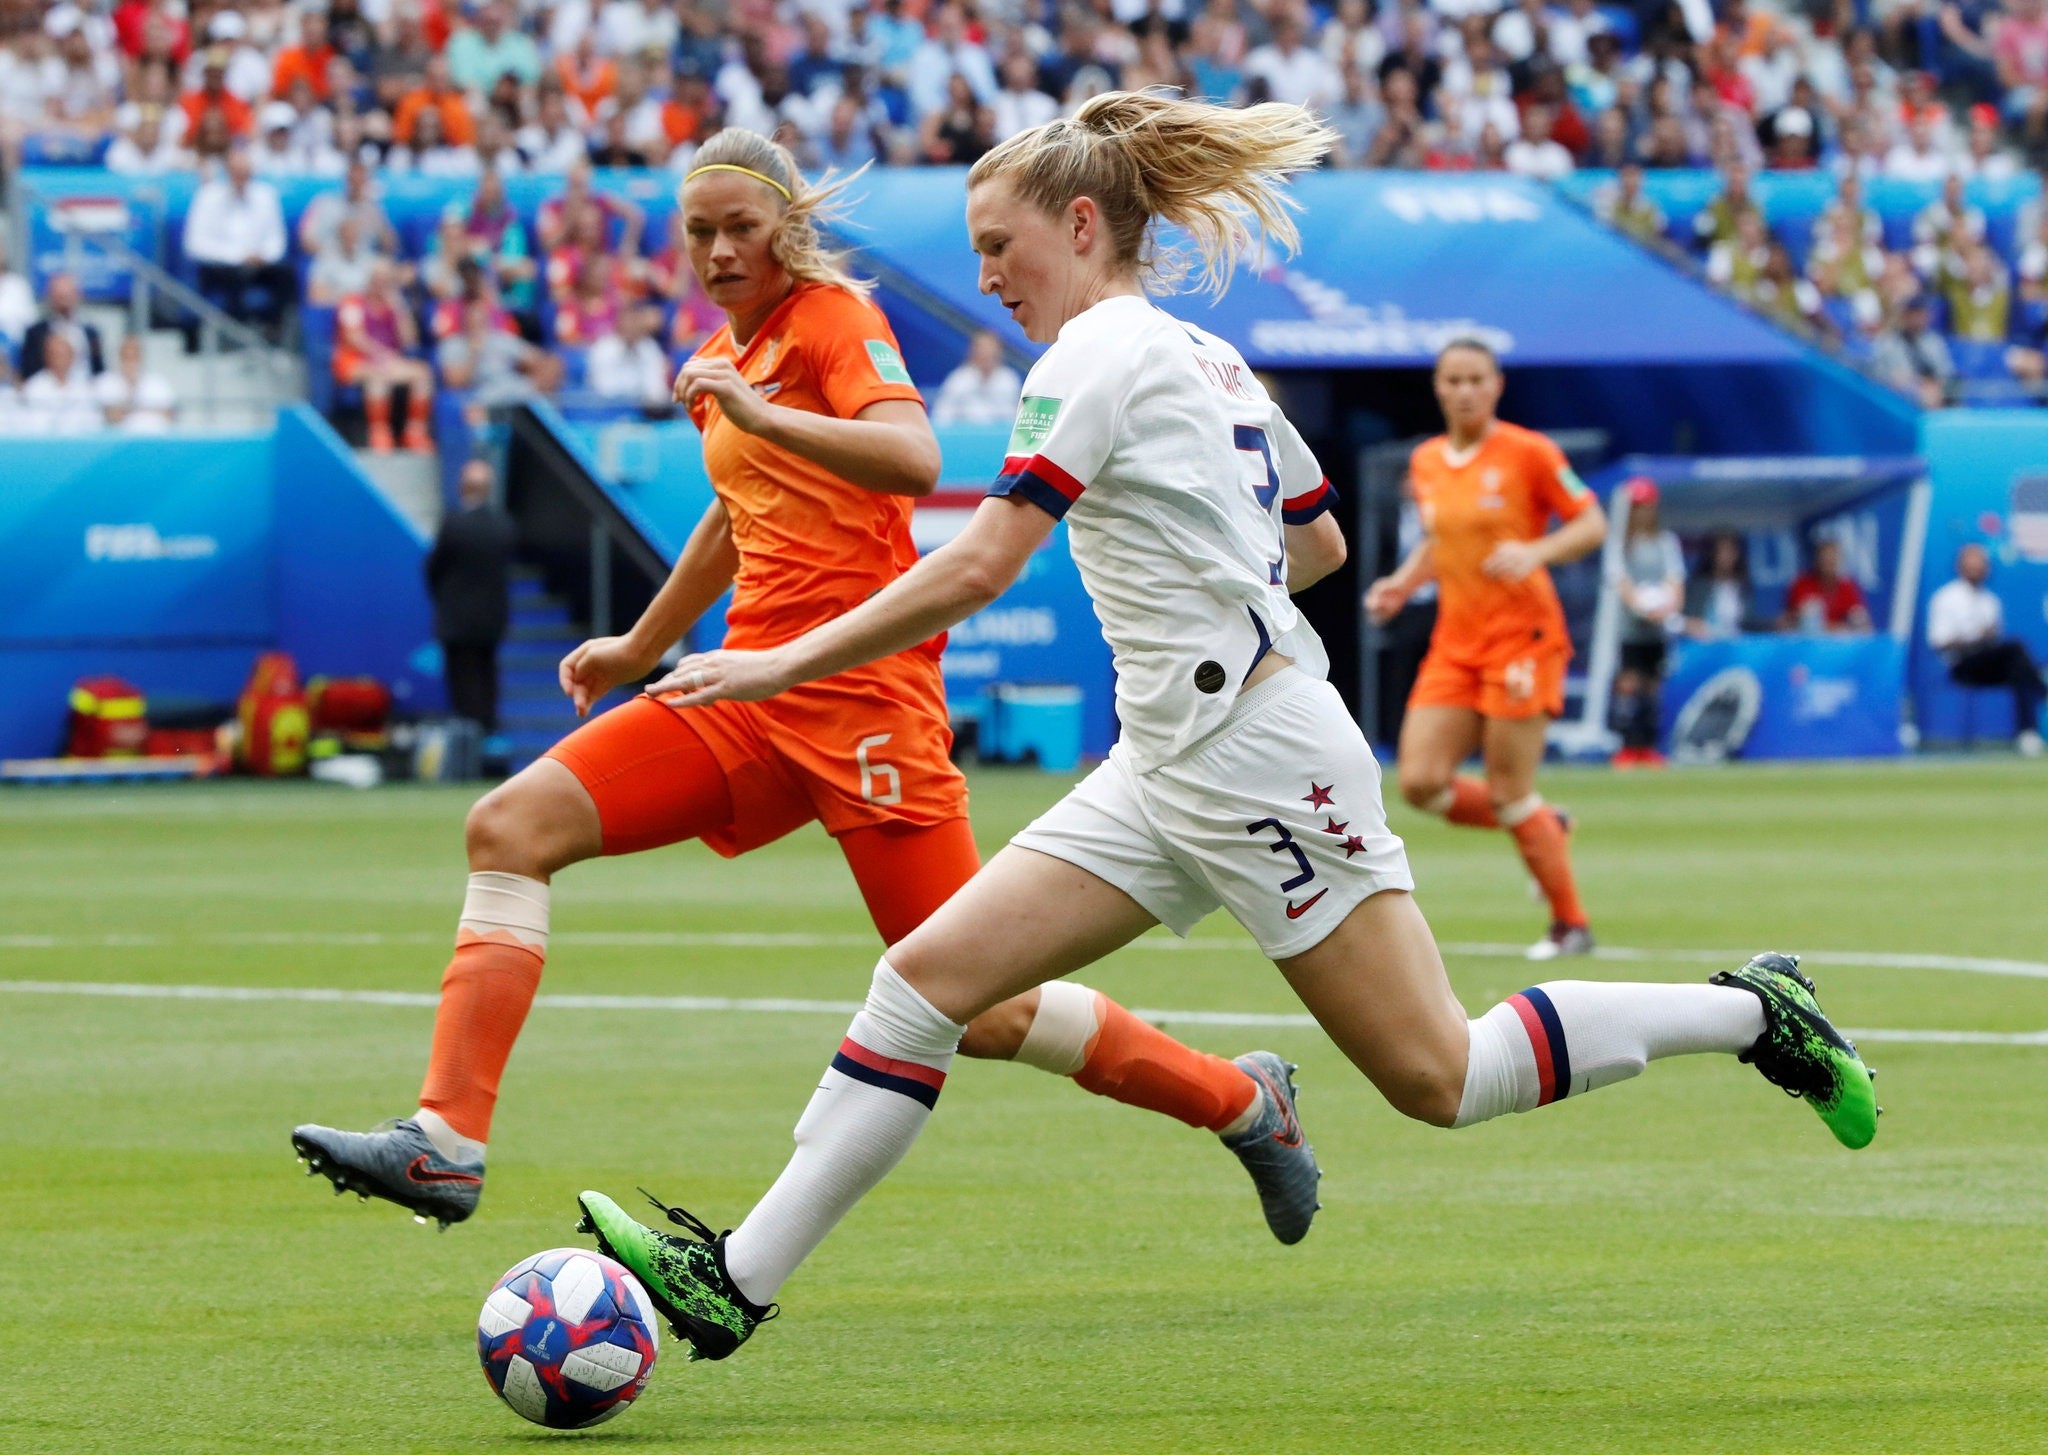 U.S.A. vs. Netherlands Live Score From the Women’s World Cup Final